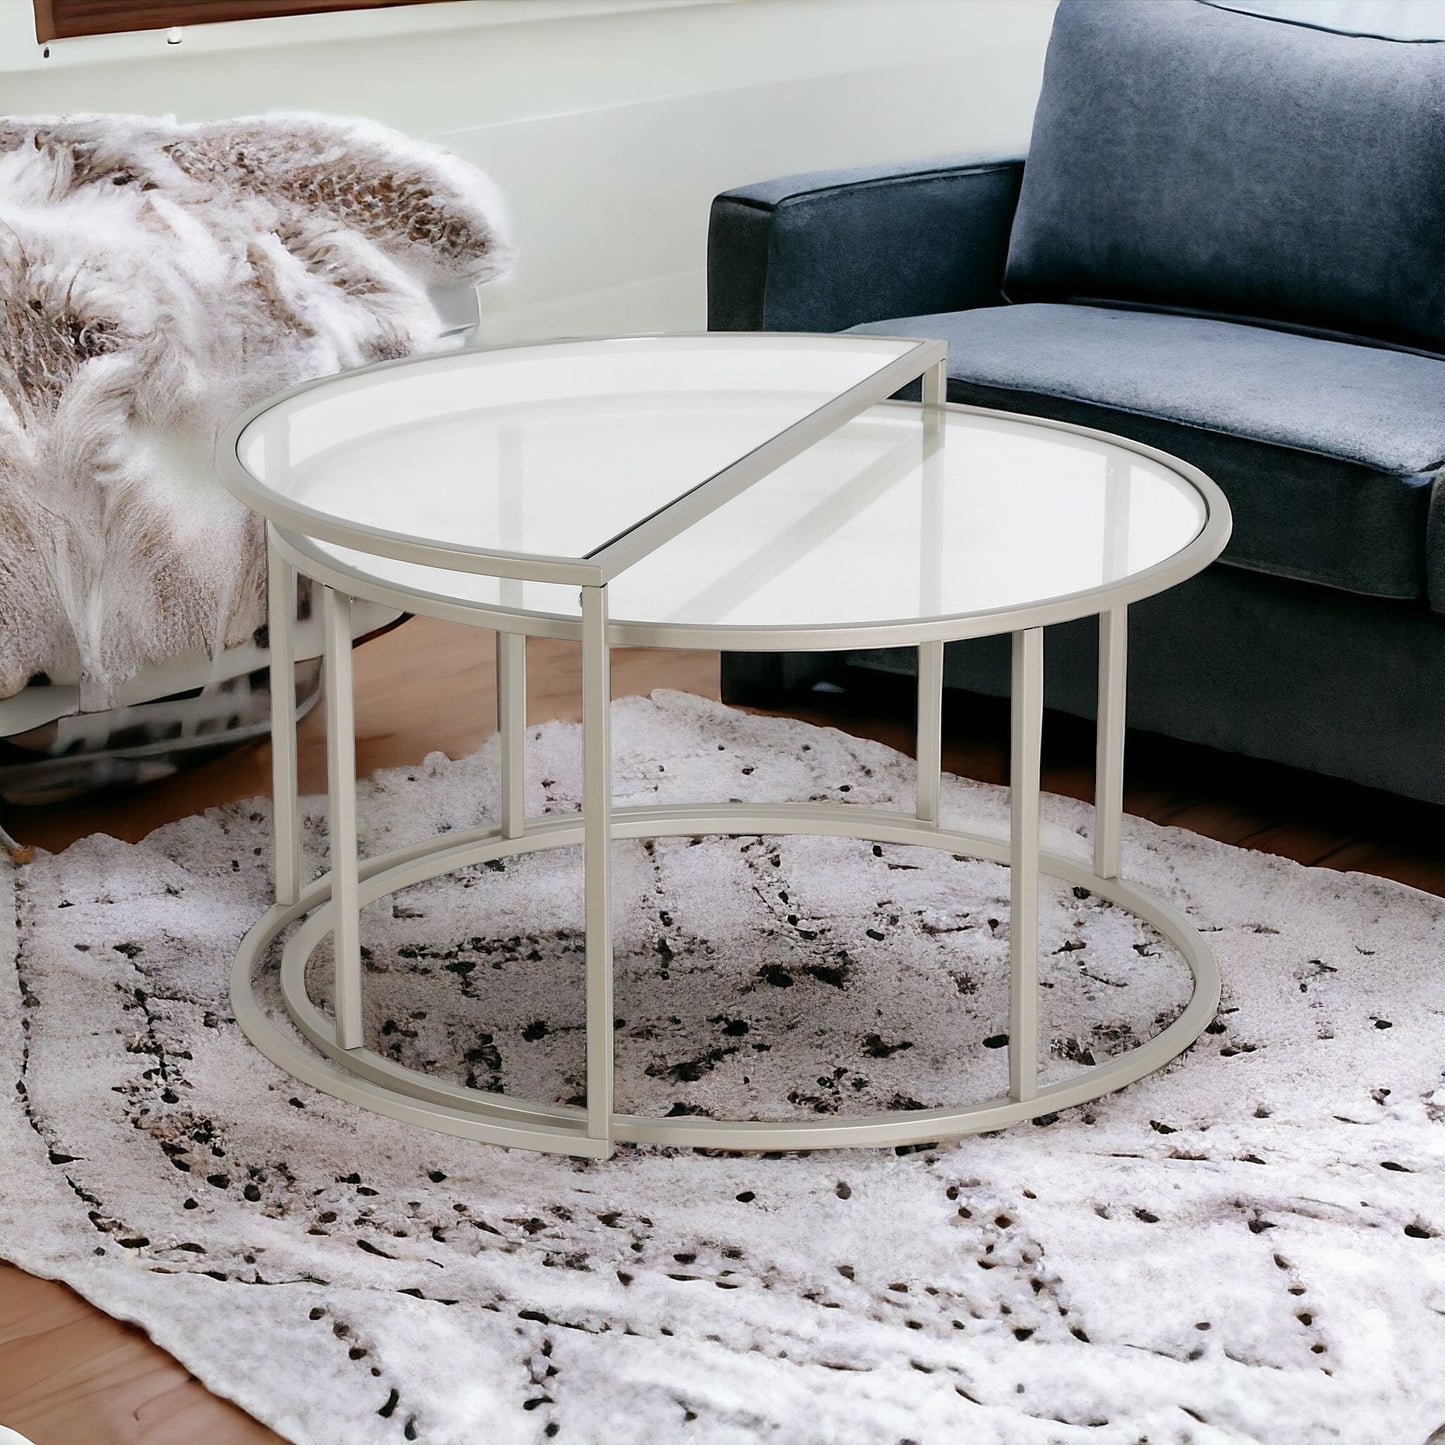 Set of Two 33" Silver Glass And Steel Half Circle Nested Coffee Tables